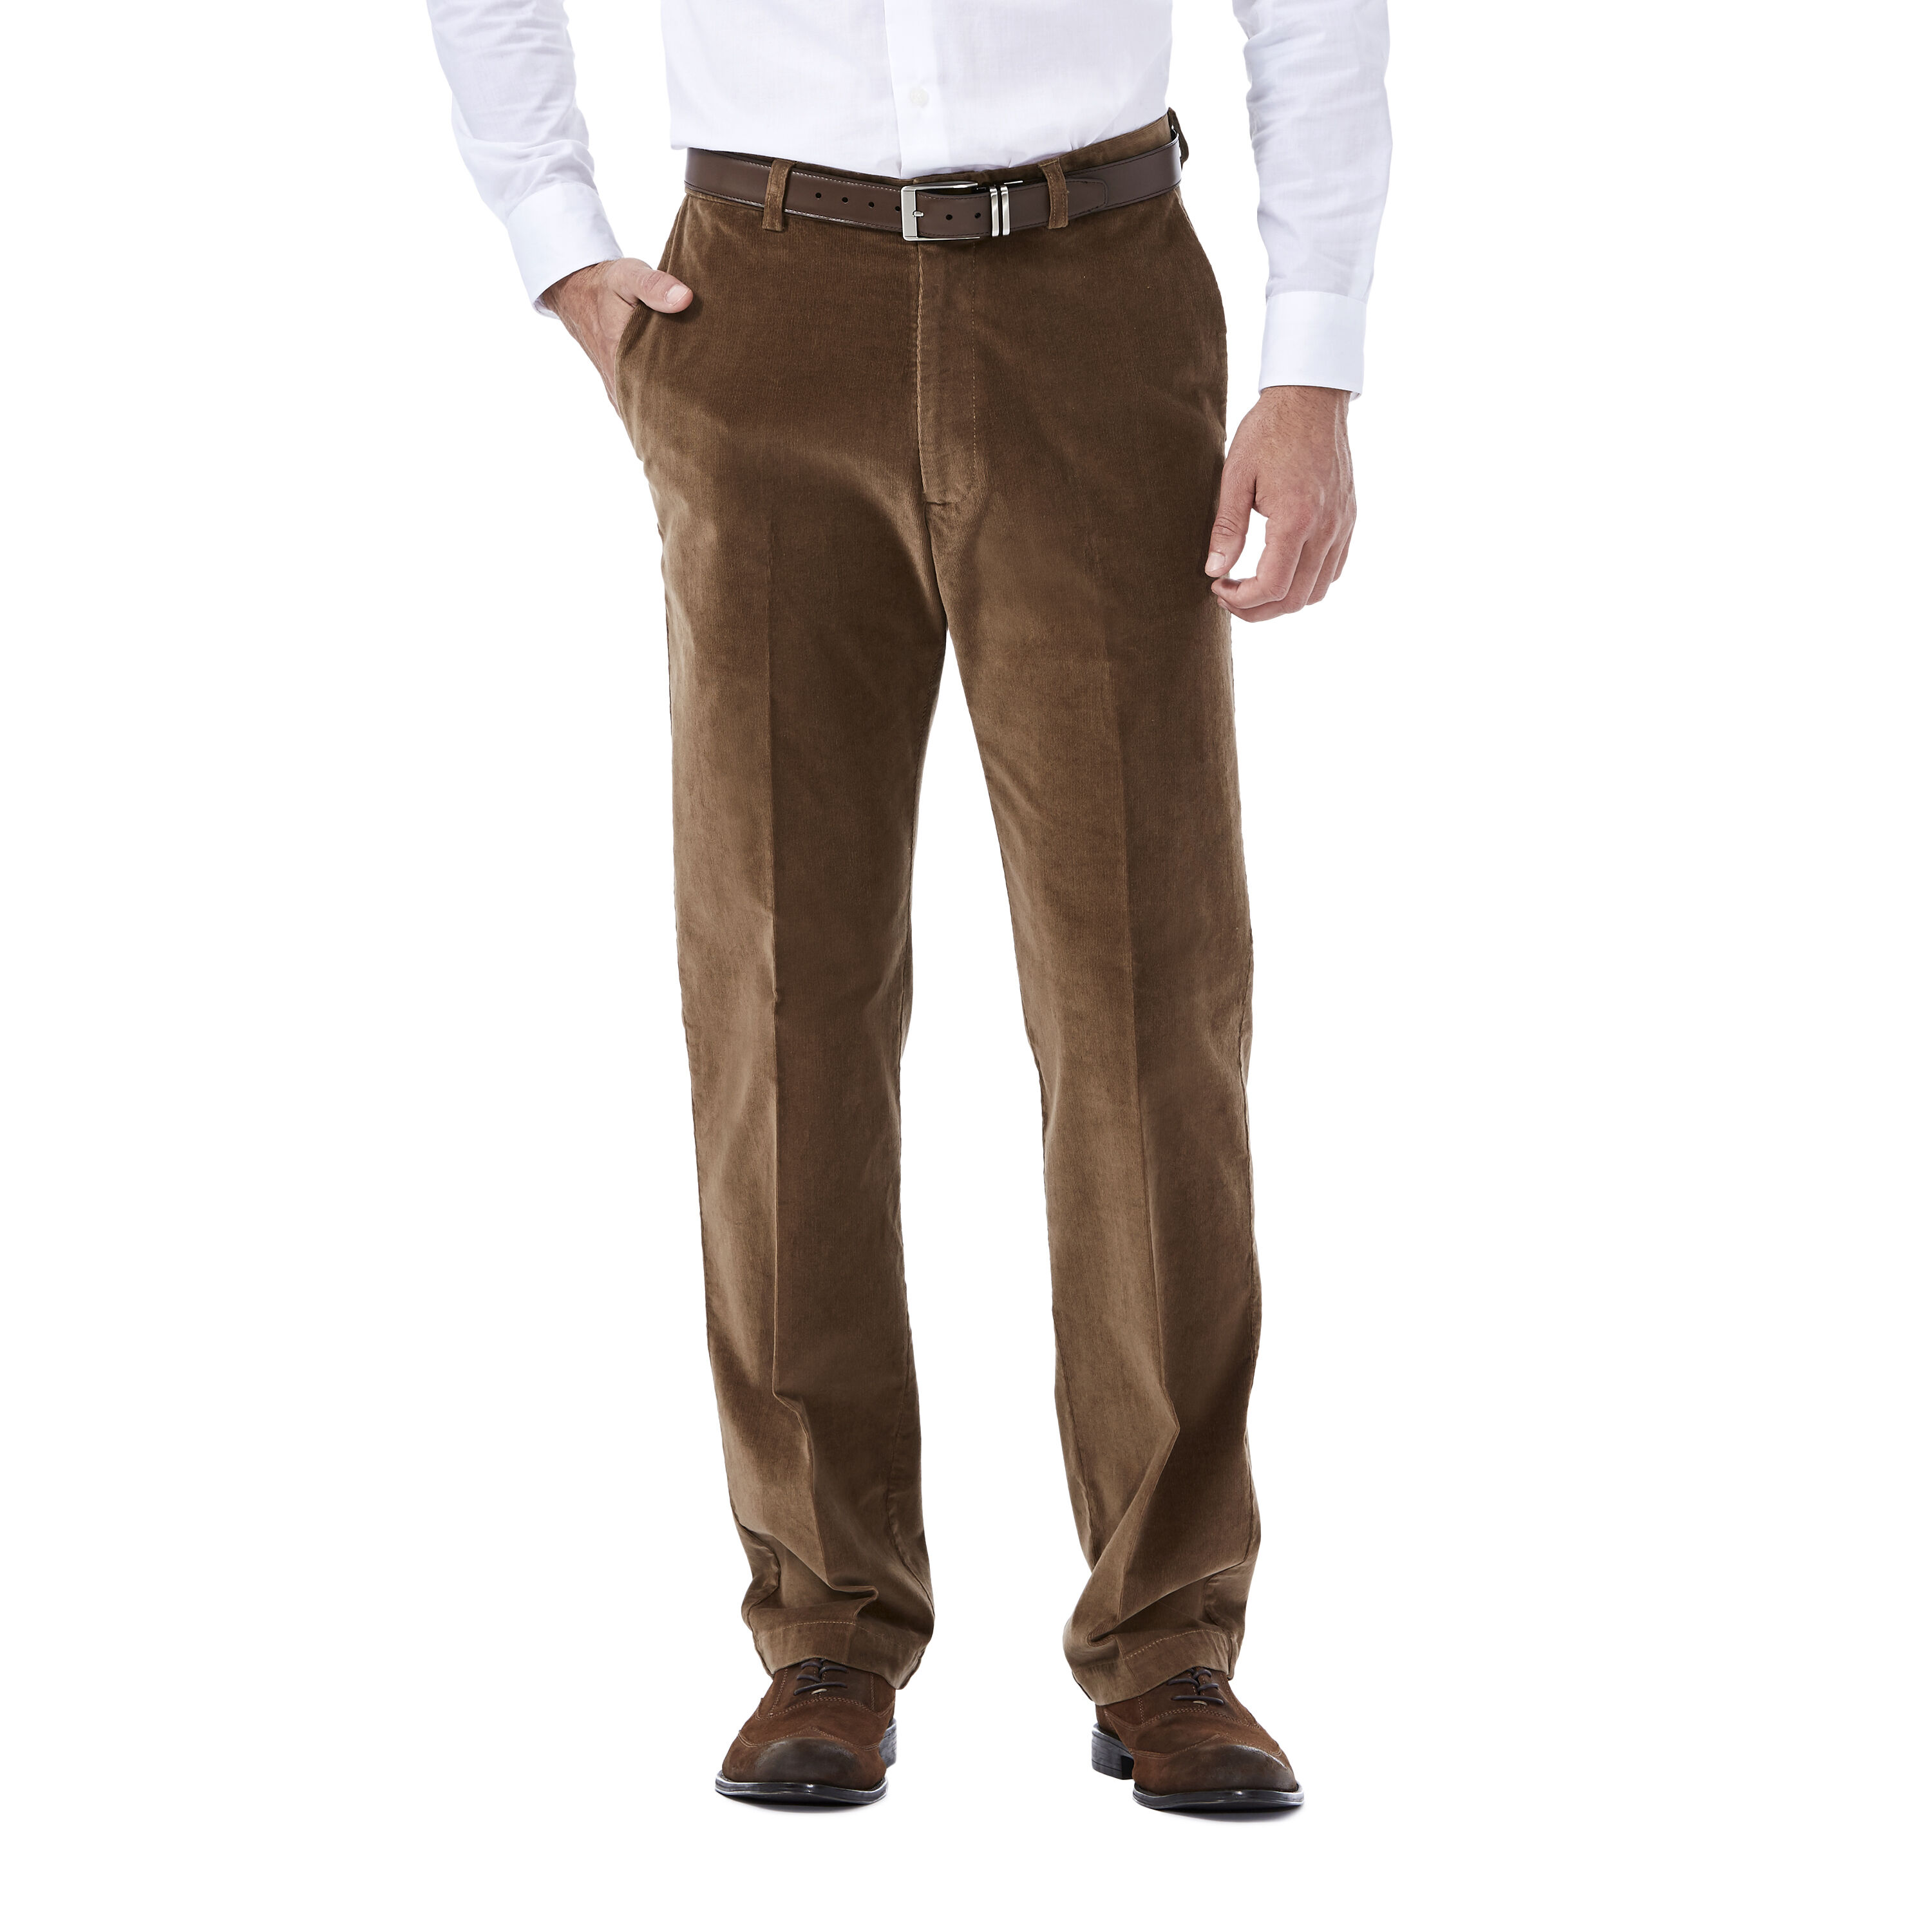 Mens Corduroy Cotton Trouser Pants with Hidden Extra Waistband ...